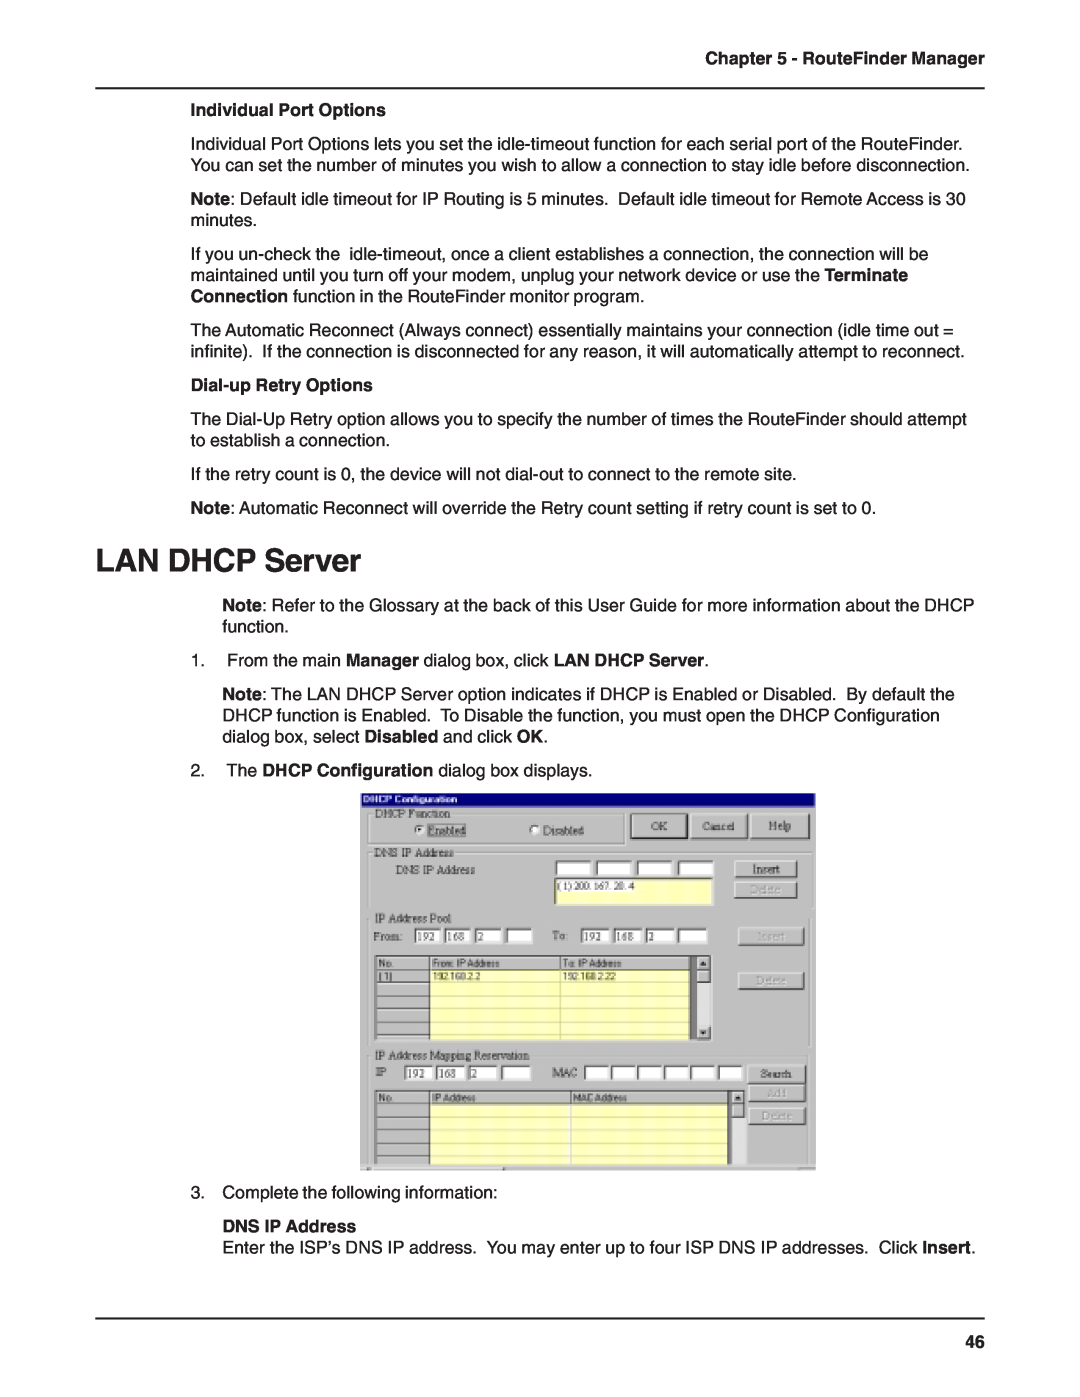 Multi-Tech Systems RF802EW manual LAN DHCP Server, RouteFinder Manager Individual Port Options, Dial-up Retry Options 